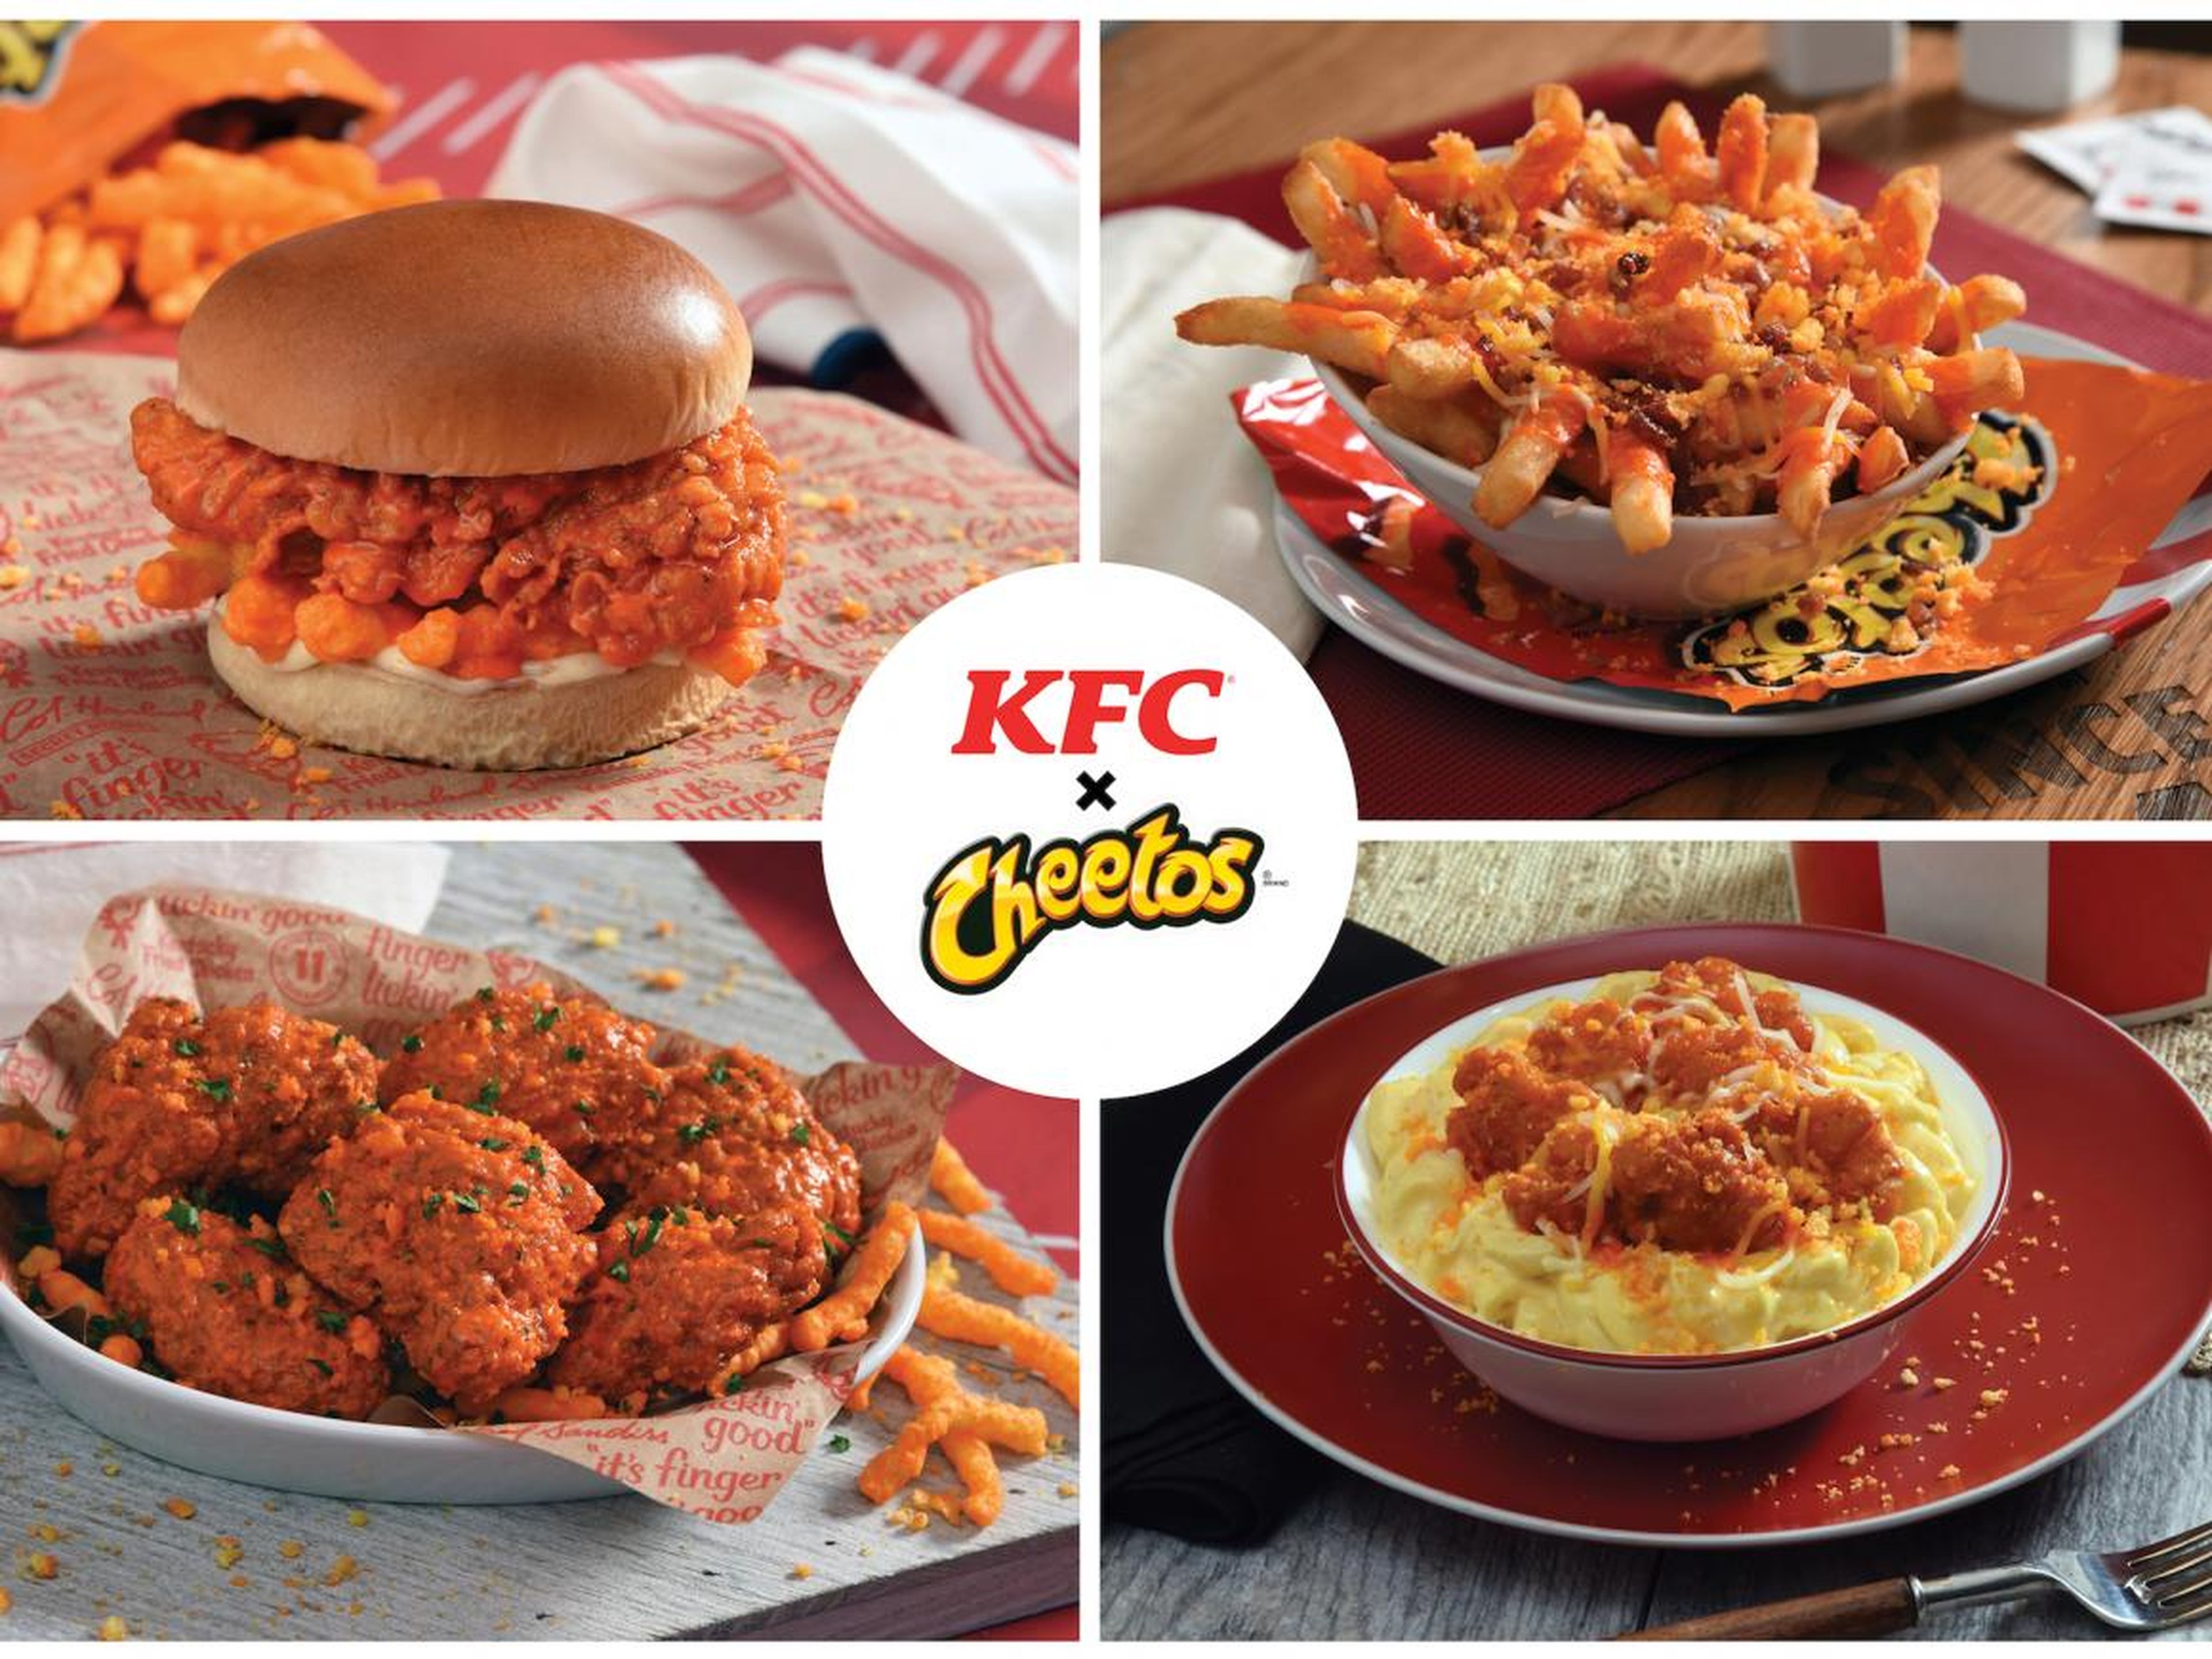 KFC is launching a Cheetos Sandwich across America, and it represents a massive shift in the chicken chain's strategy